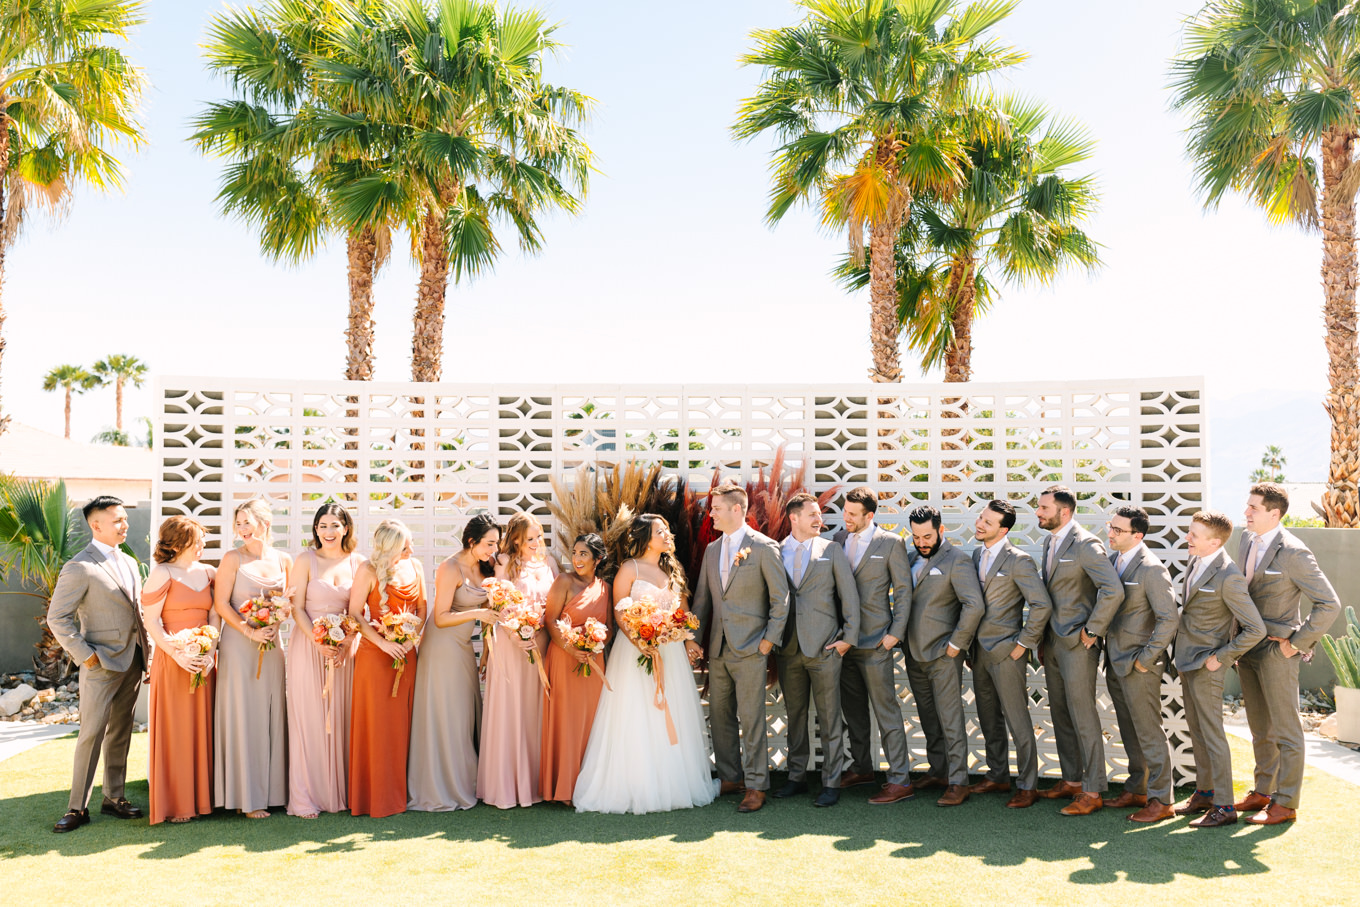 Wedding party on breeze block wall | Pink and orange Lautner Compound wedding | Colorful Palm Springs wedding photography | #palmspringsphotographer #palmspringswedding #lautnercompound #southerncaliforniawedding  Source: Mary Costa Photography | Los Angeles